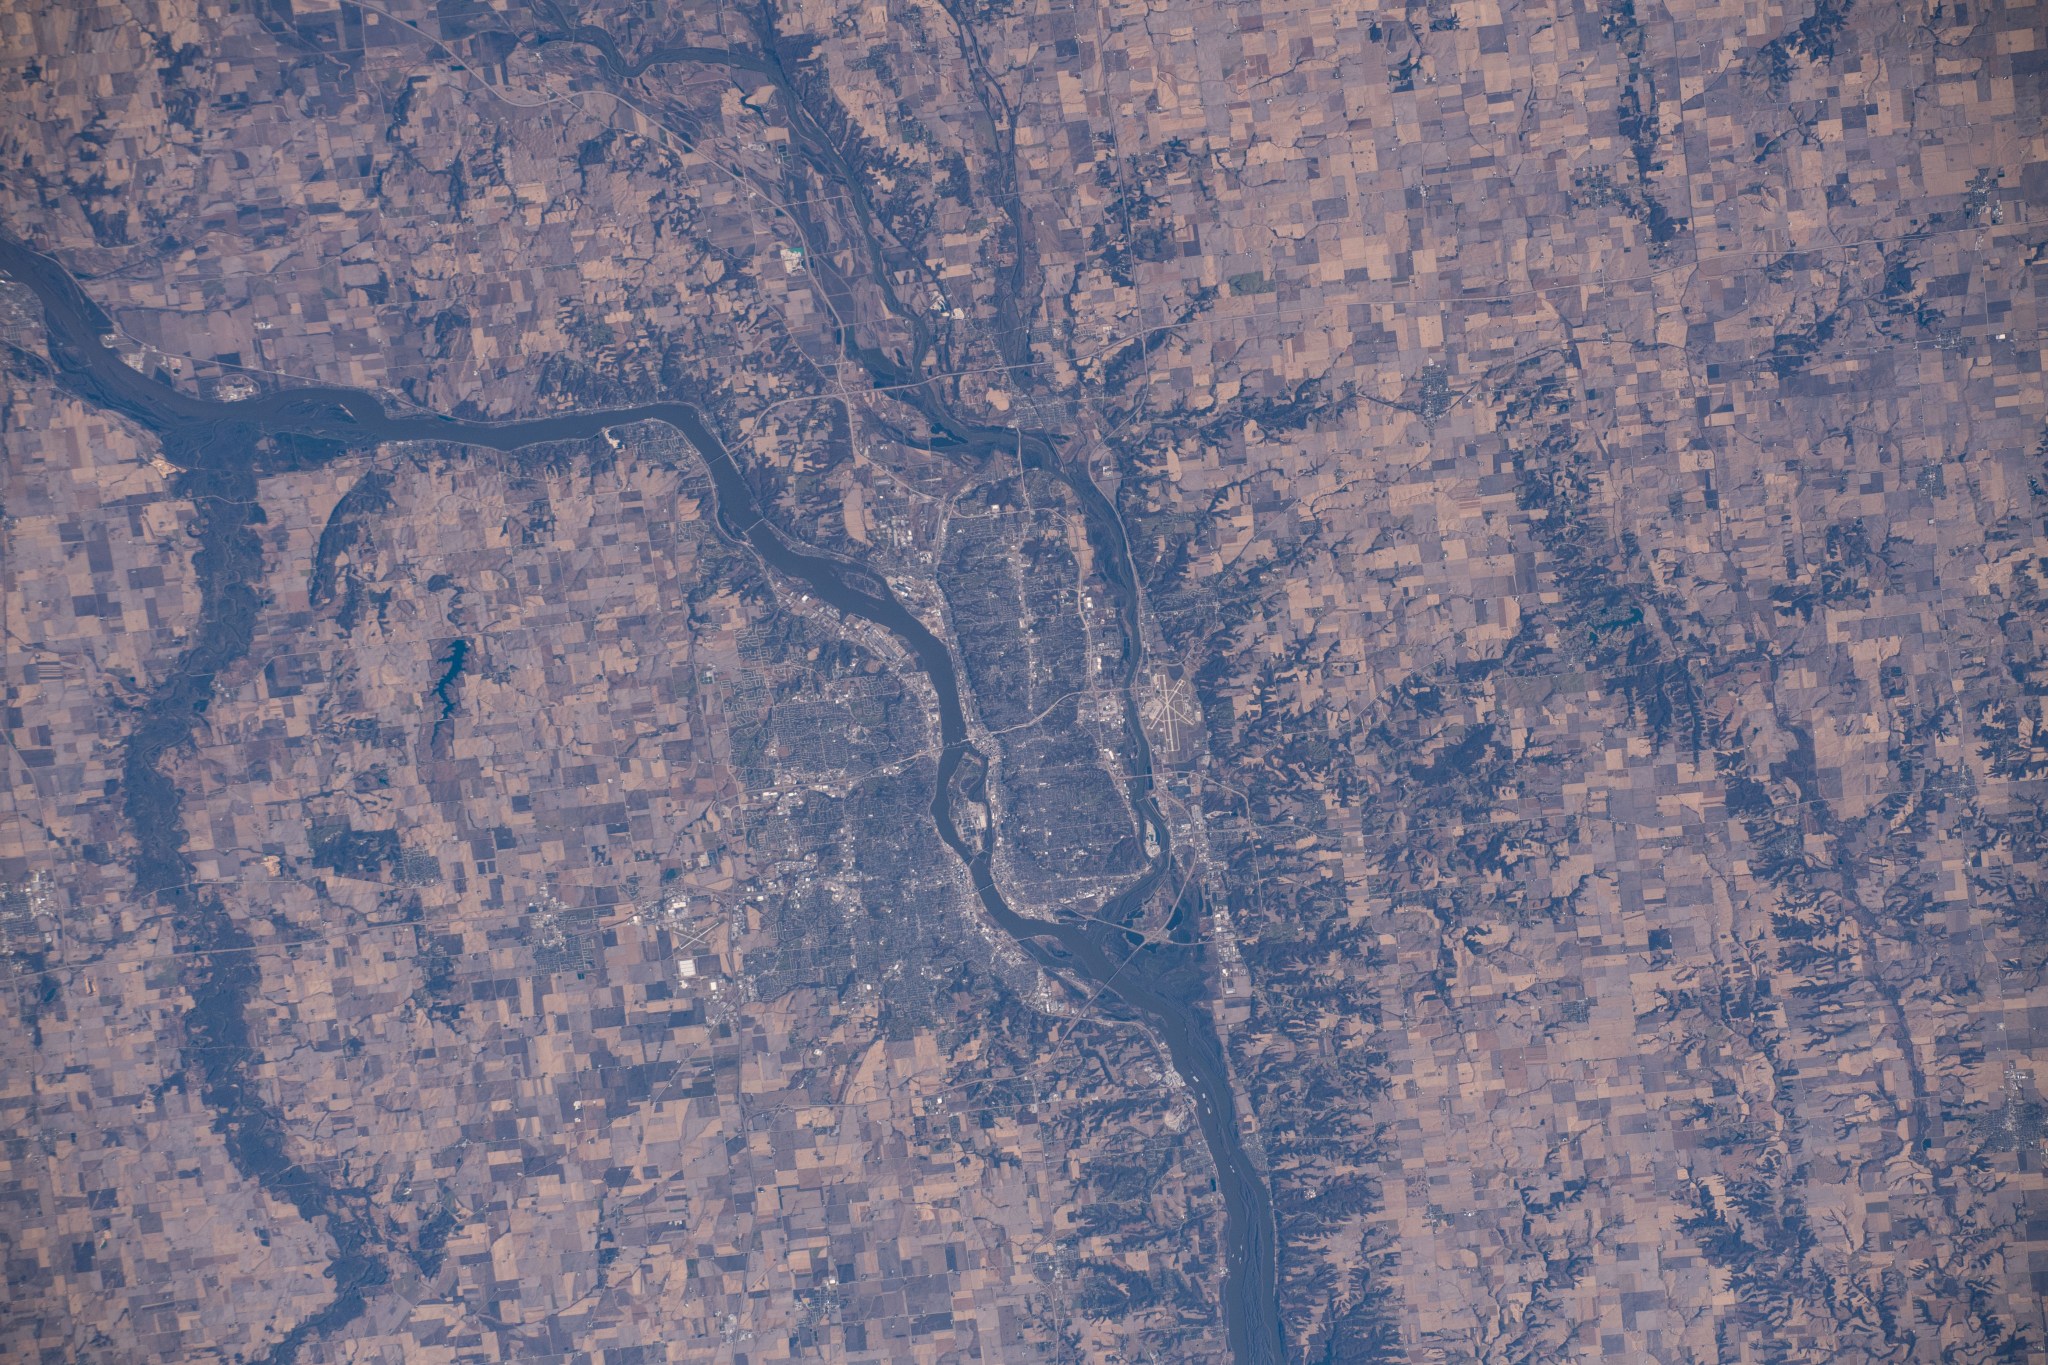 iss061e067892 (Dec. 6, 2019) --- The city of Moline, Illinois is surrounded by the Mississippi and Rock Rivers. The Mississippi River is the boundary between the states of Illinois and Iowa.